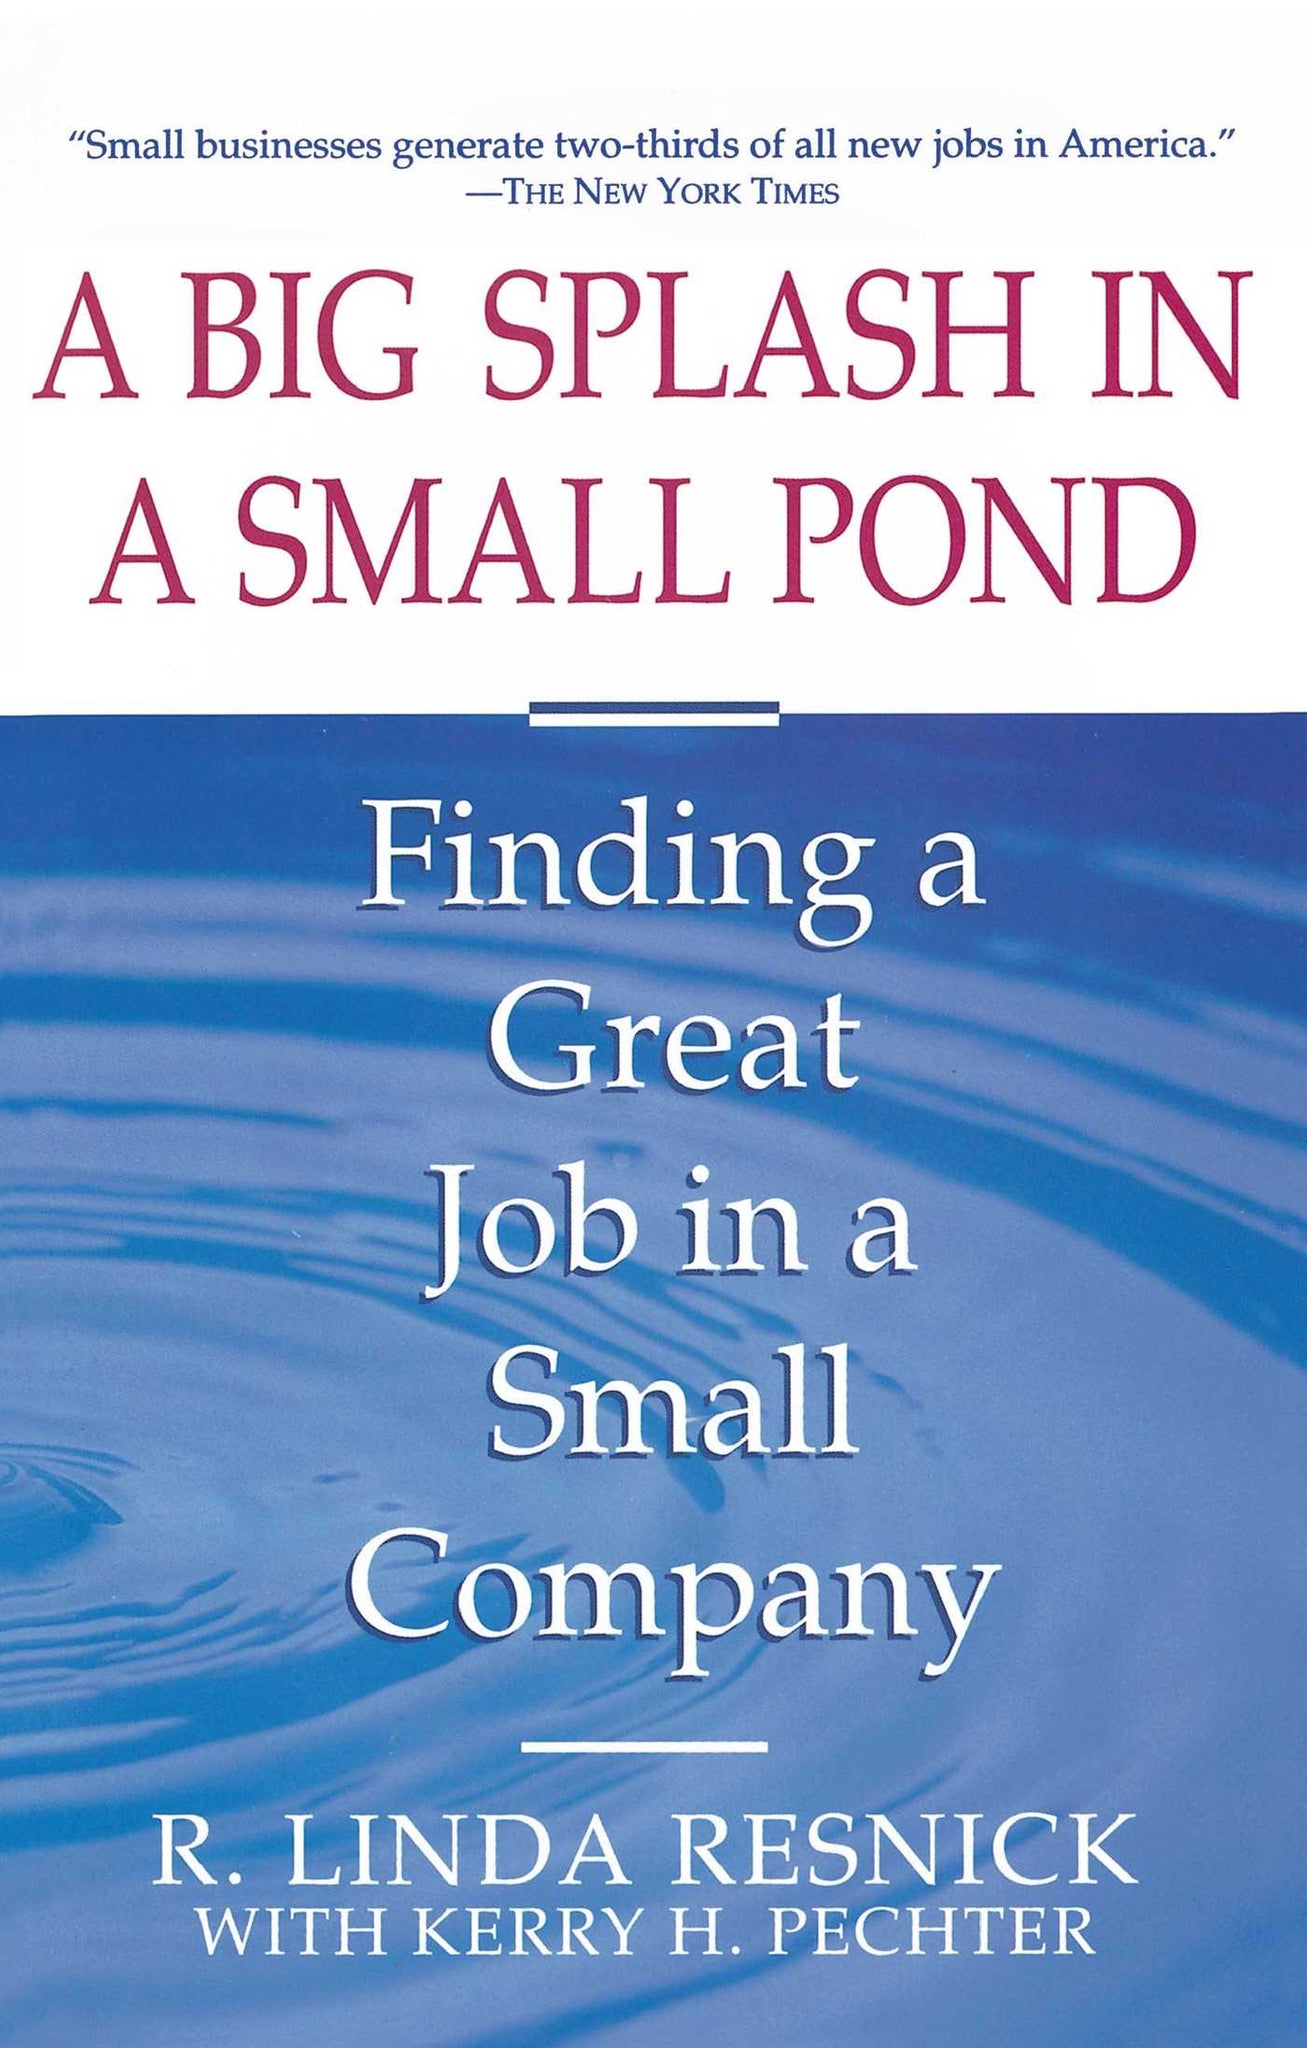 A   Big Splash in a Small Pond   : Finding a Great Job in a Small Company